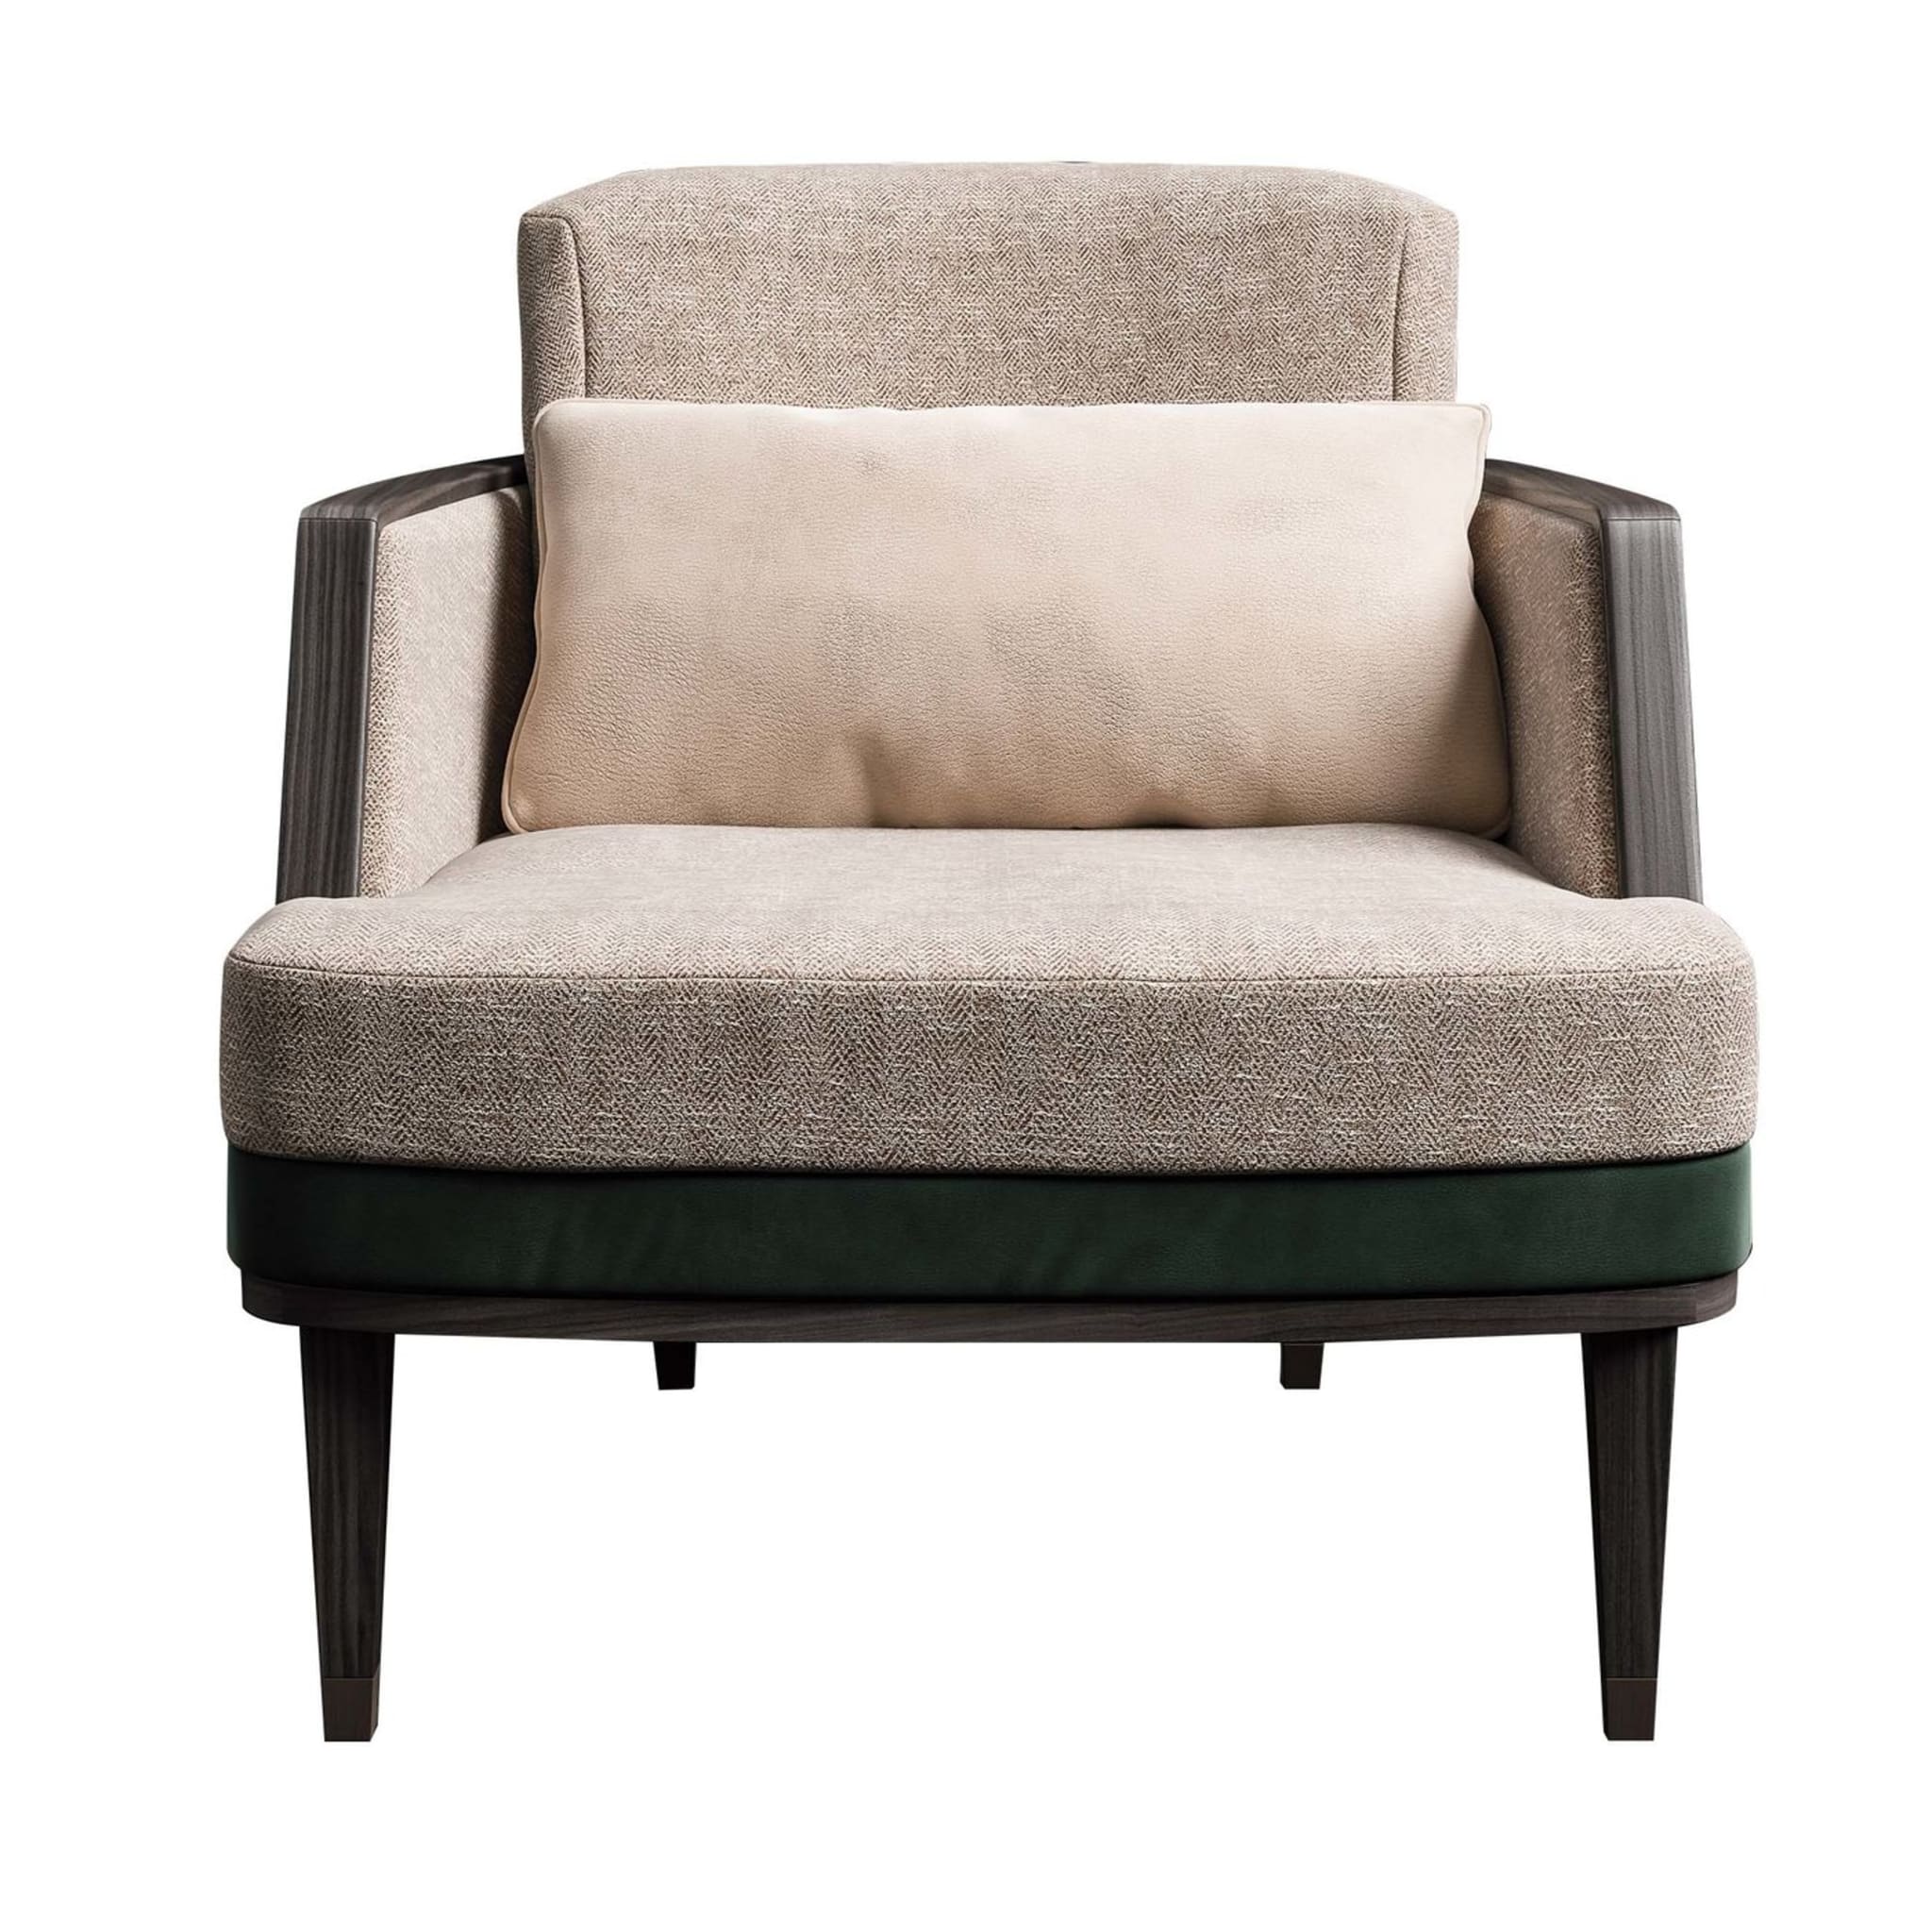 Stylish Armchair Crafted in Italy